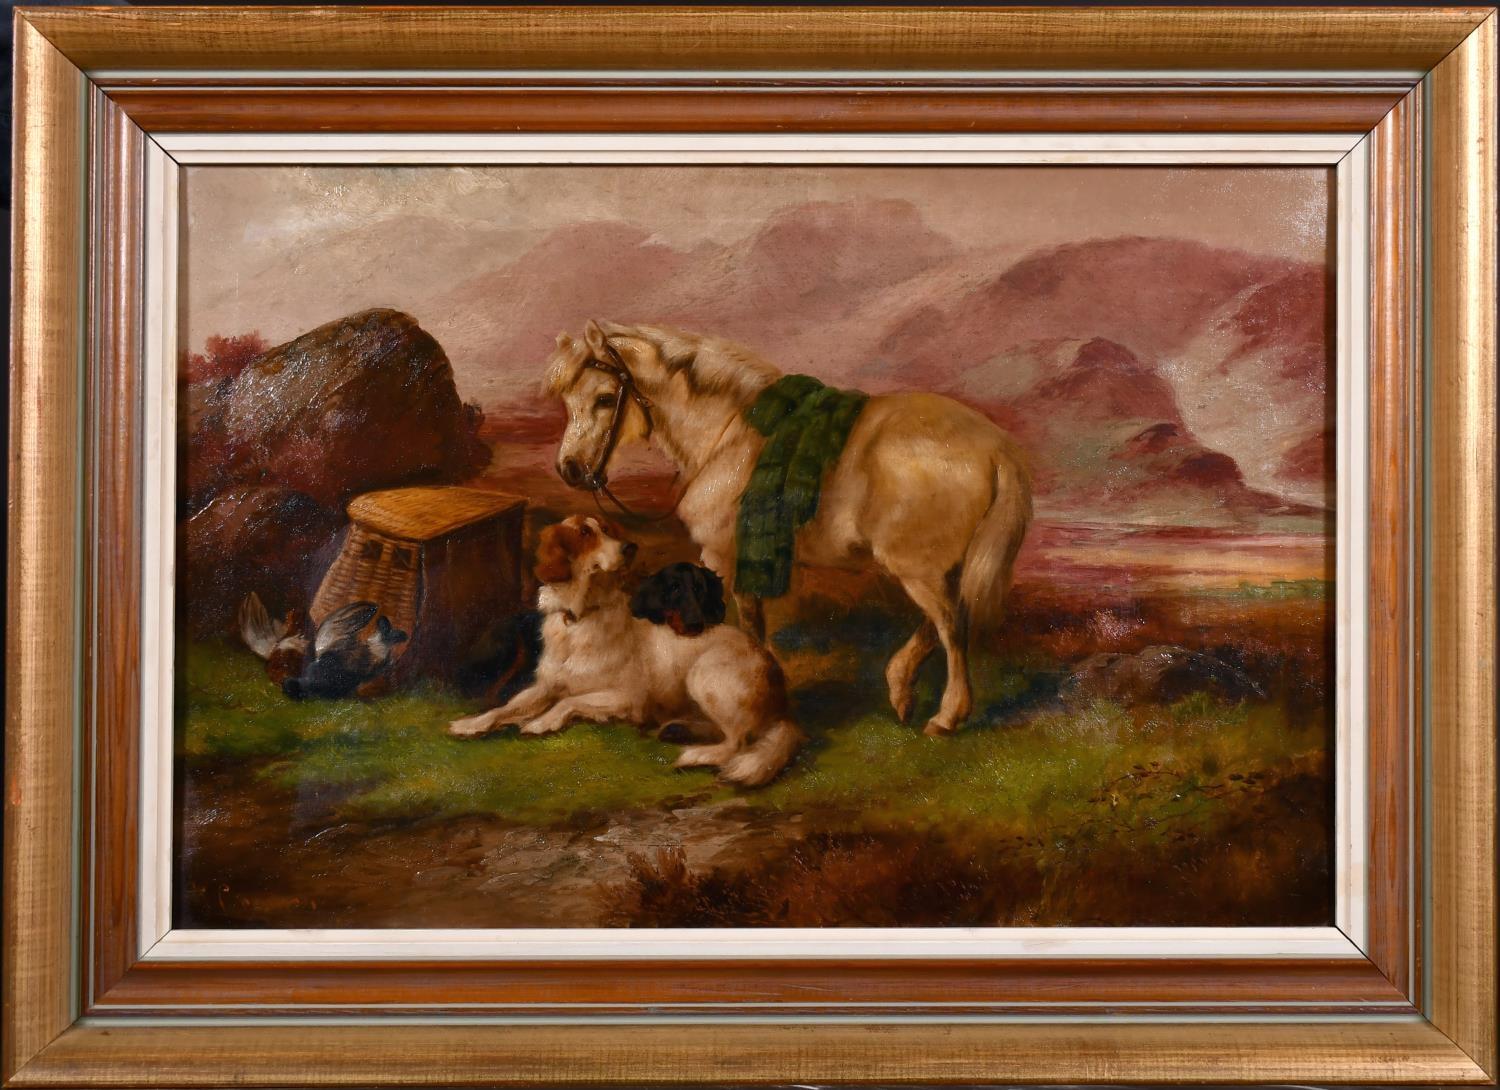 ROBERT CLEMINSON (1864-1903) LARGE SIGNED OIL HIGHLAND PONY & SPANIEL LANDSCAPE - Painting by Robert Cleminson